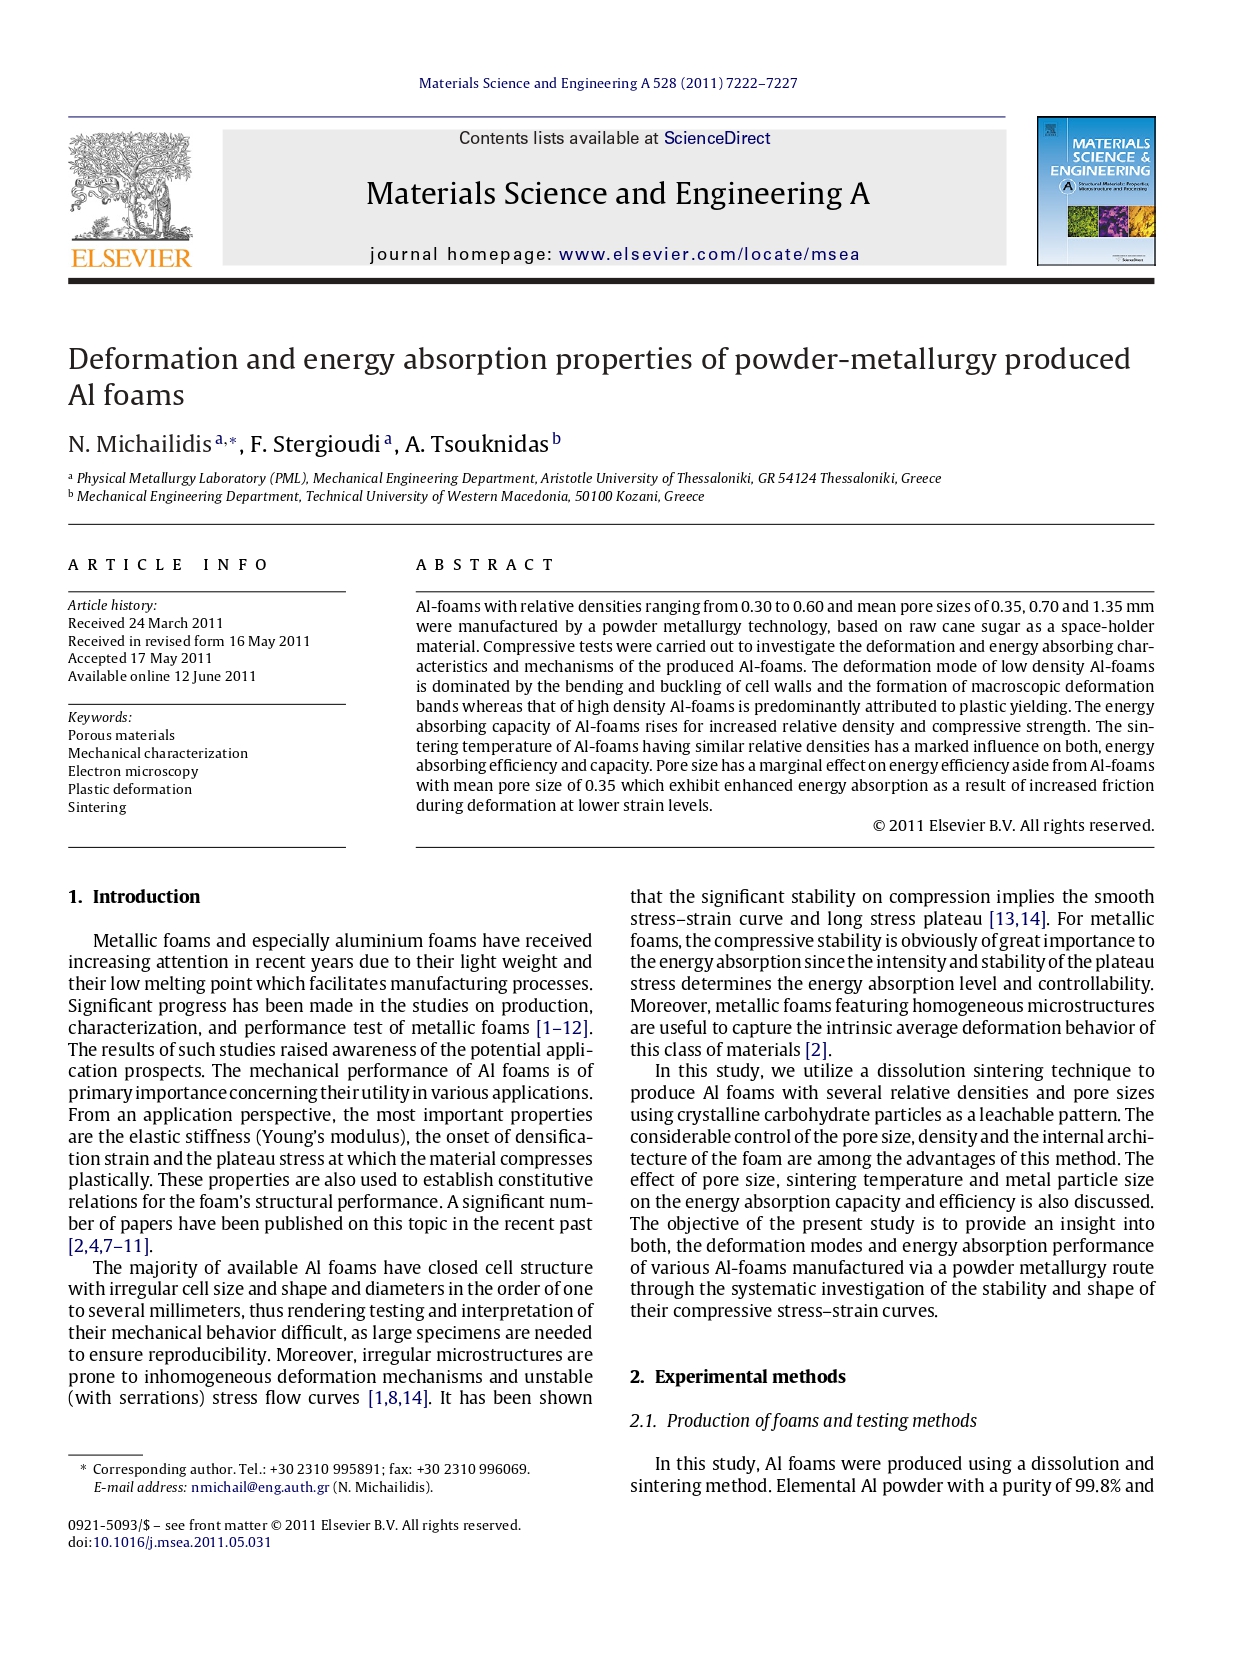 Deformation and energy absorption properties of powder-metallurgy produced Al foams_page-0001.jpg